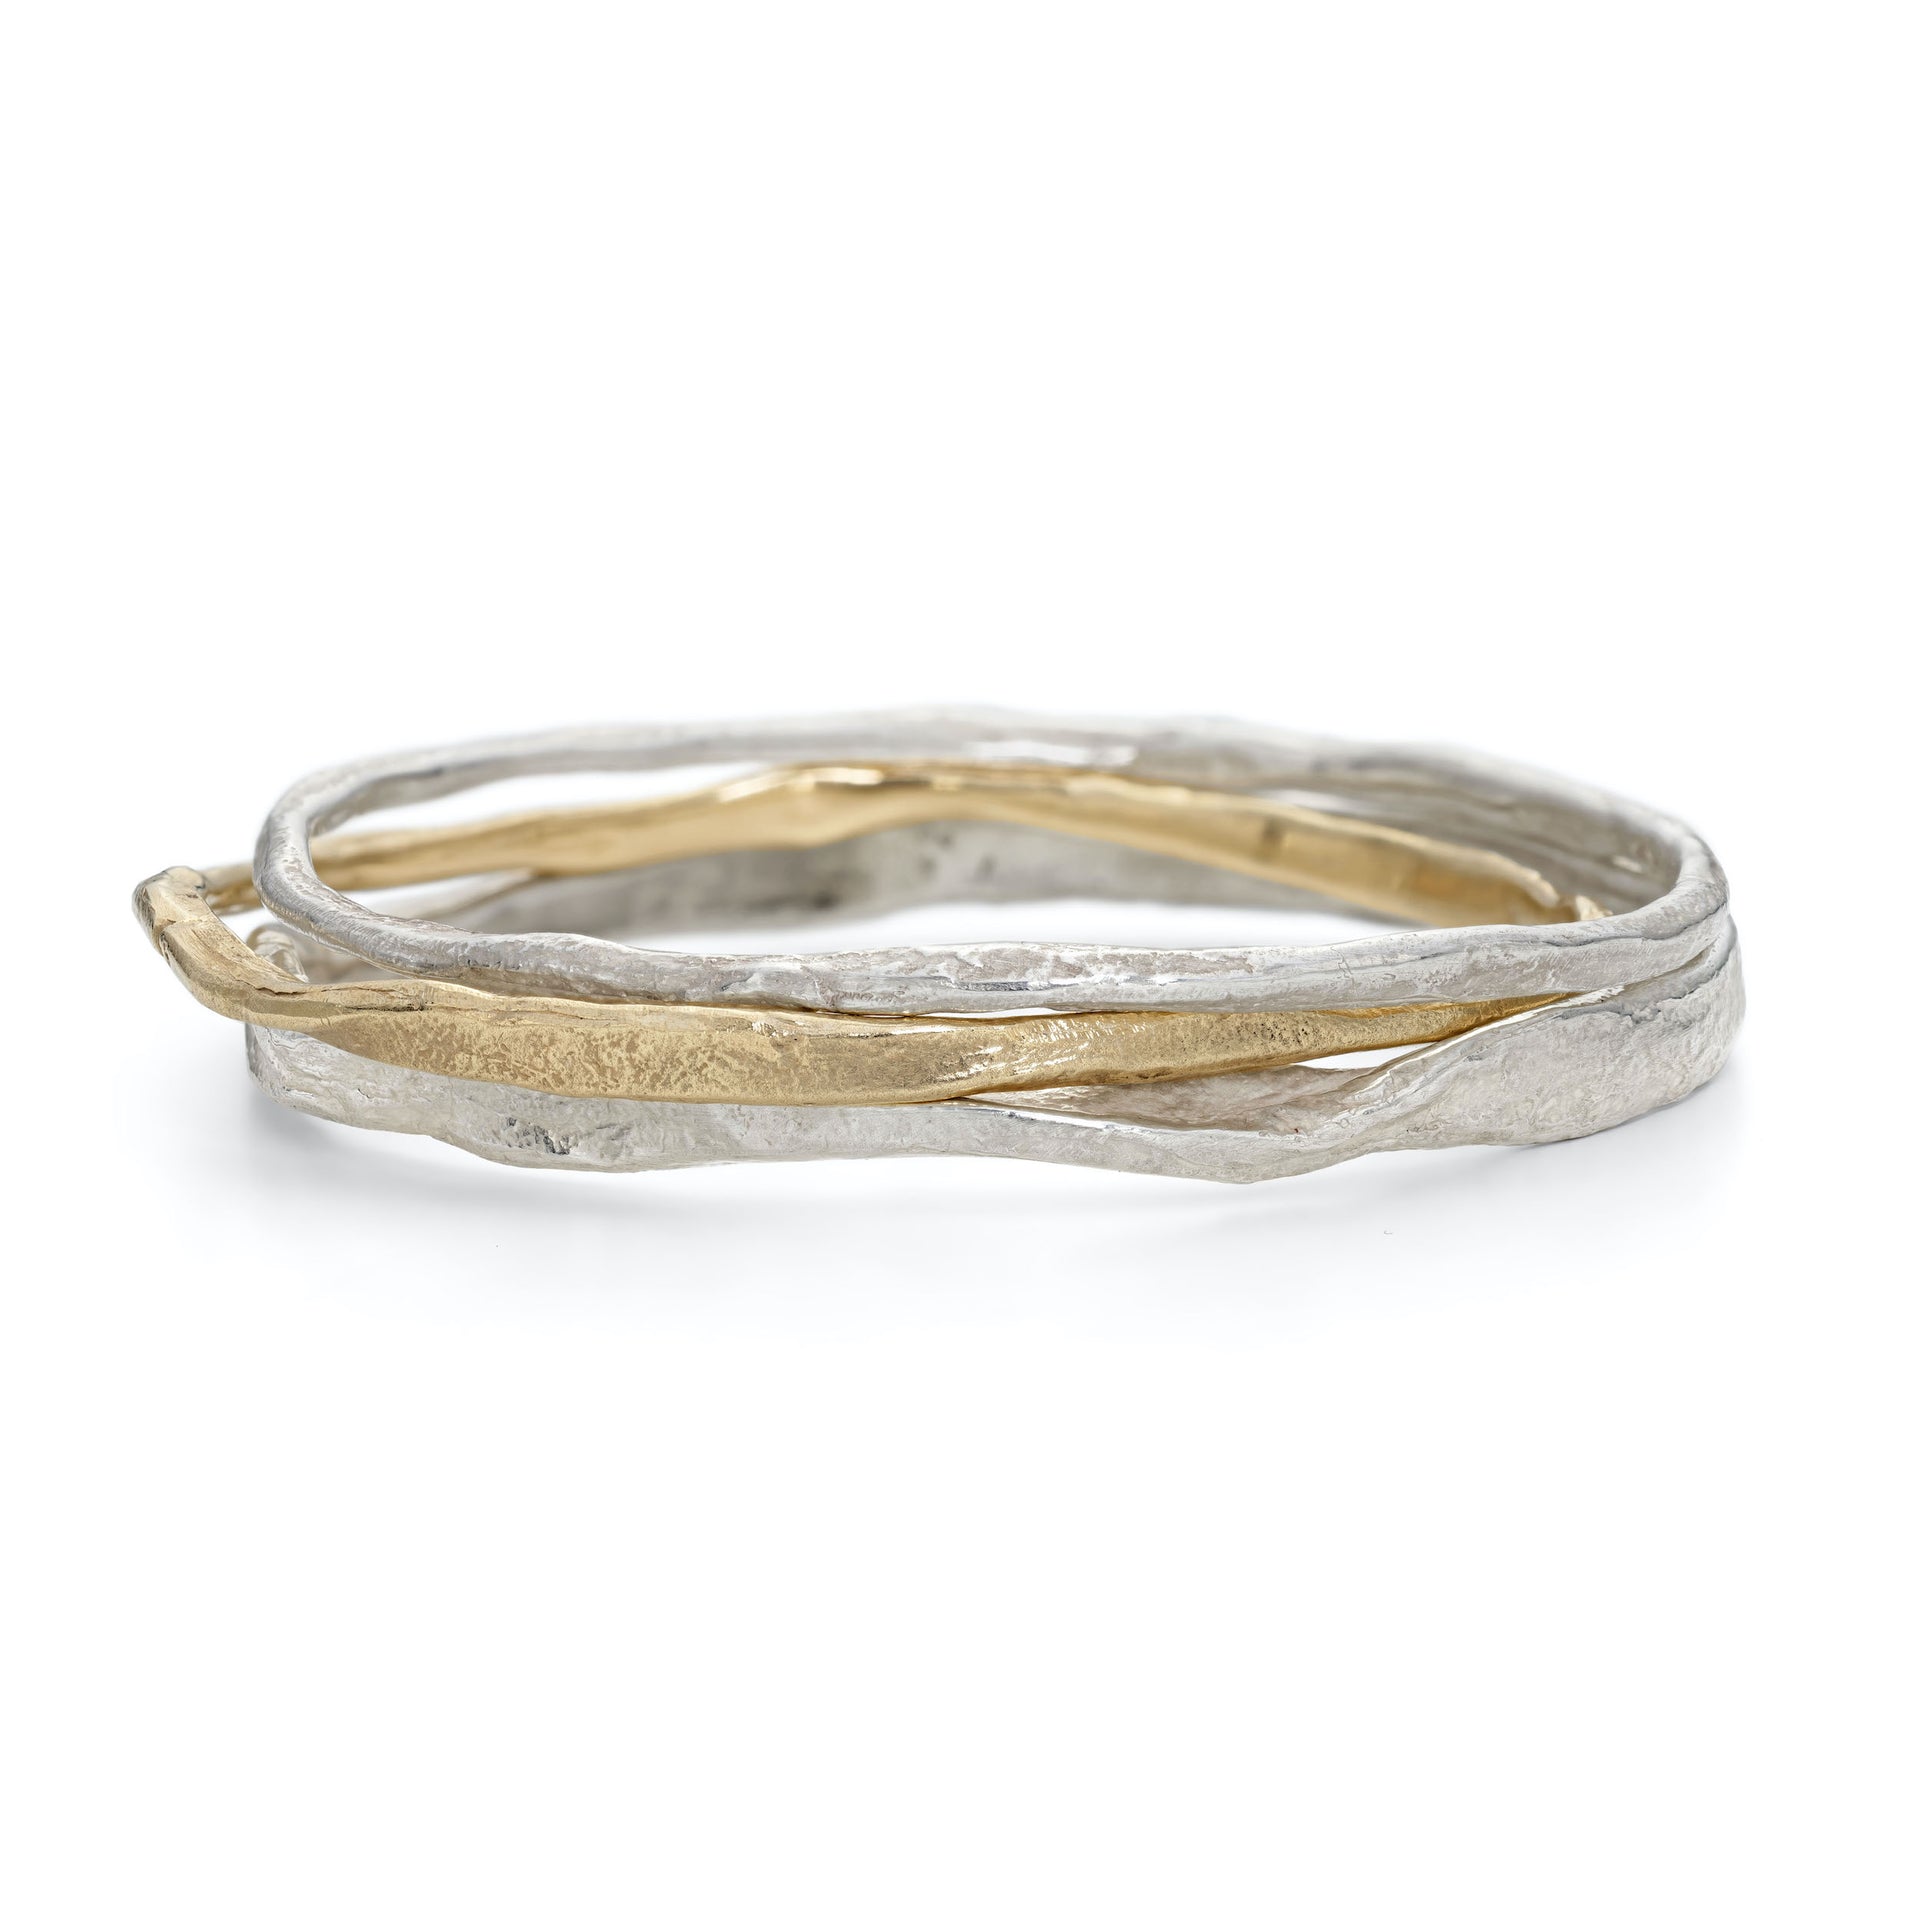 Stacking bangles in solid silver and gold. Chunky, irregular bangles in uneven widths have an organic texture and coastal character. Crafted in Cornwall by Emily Nixon.